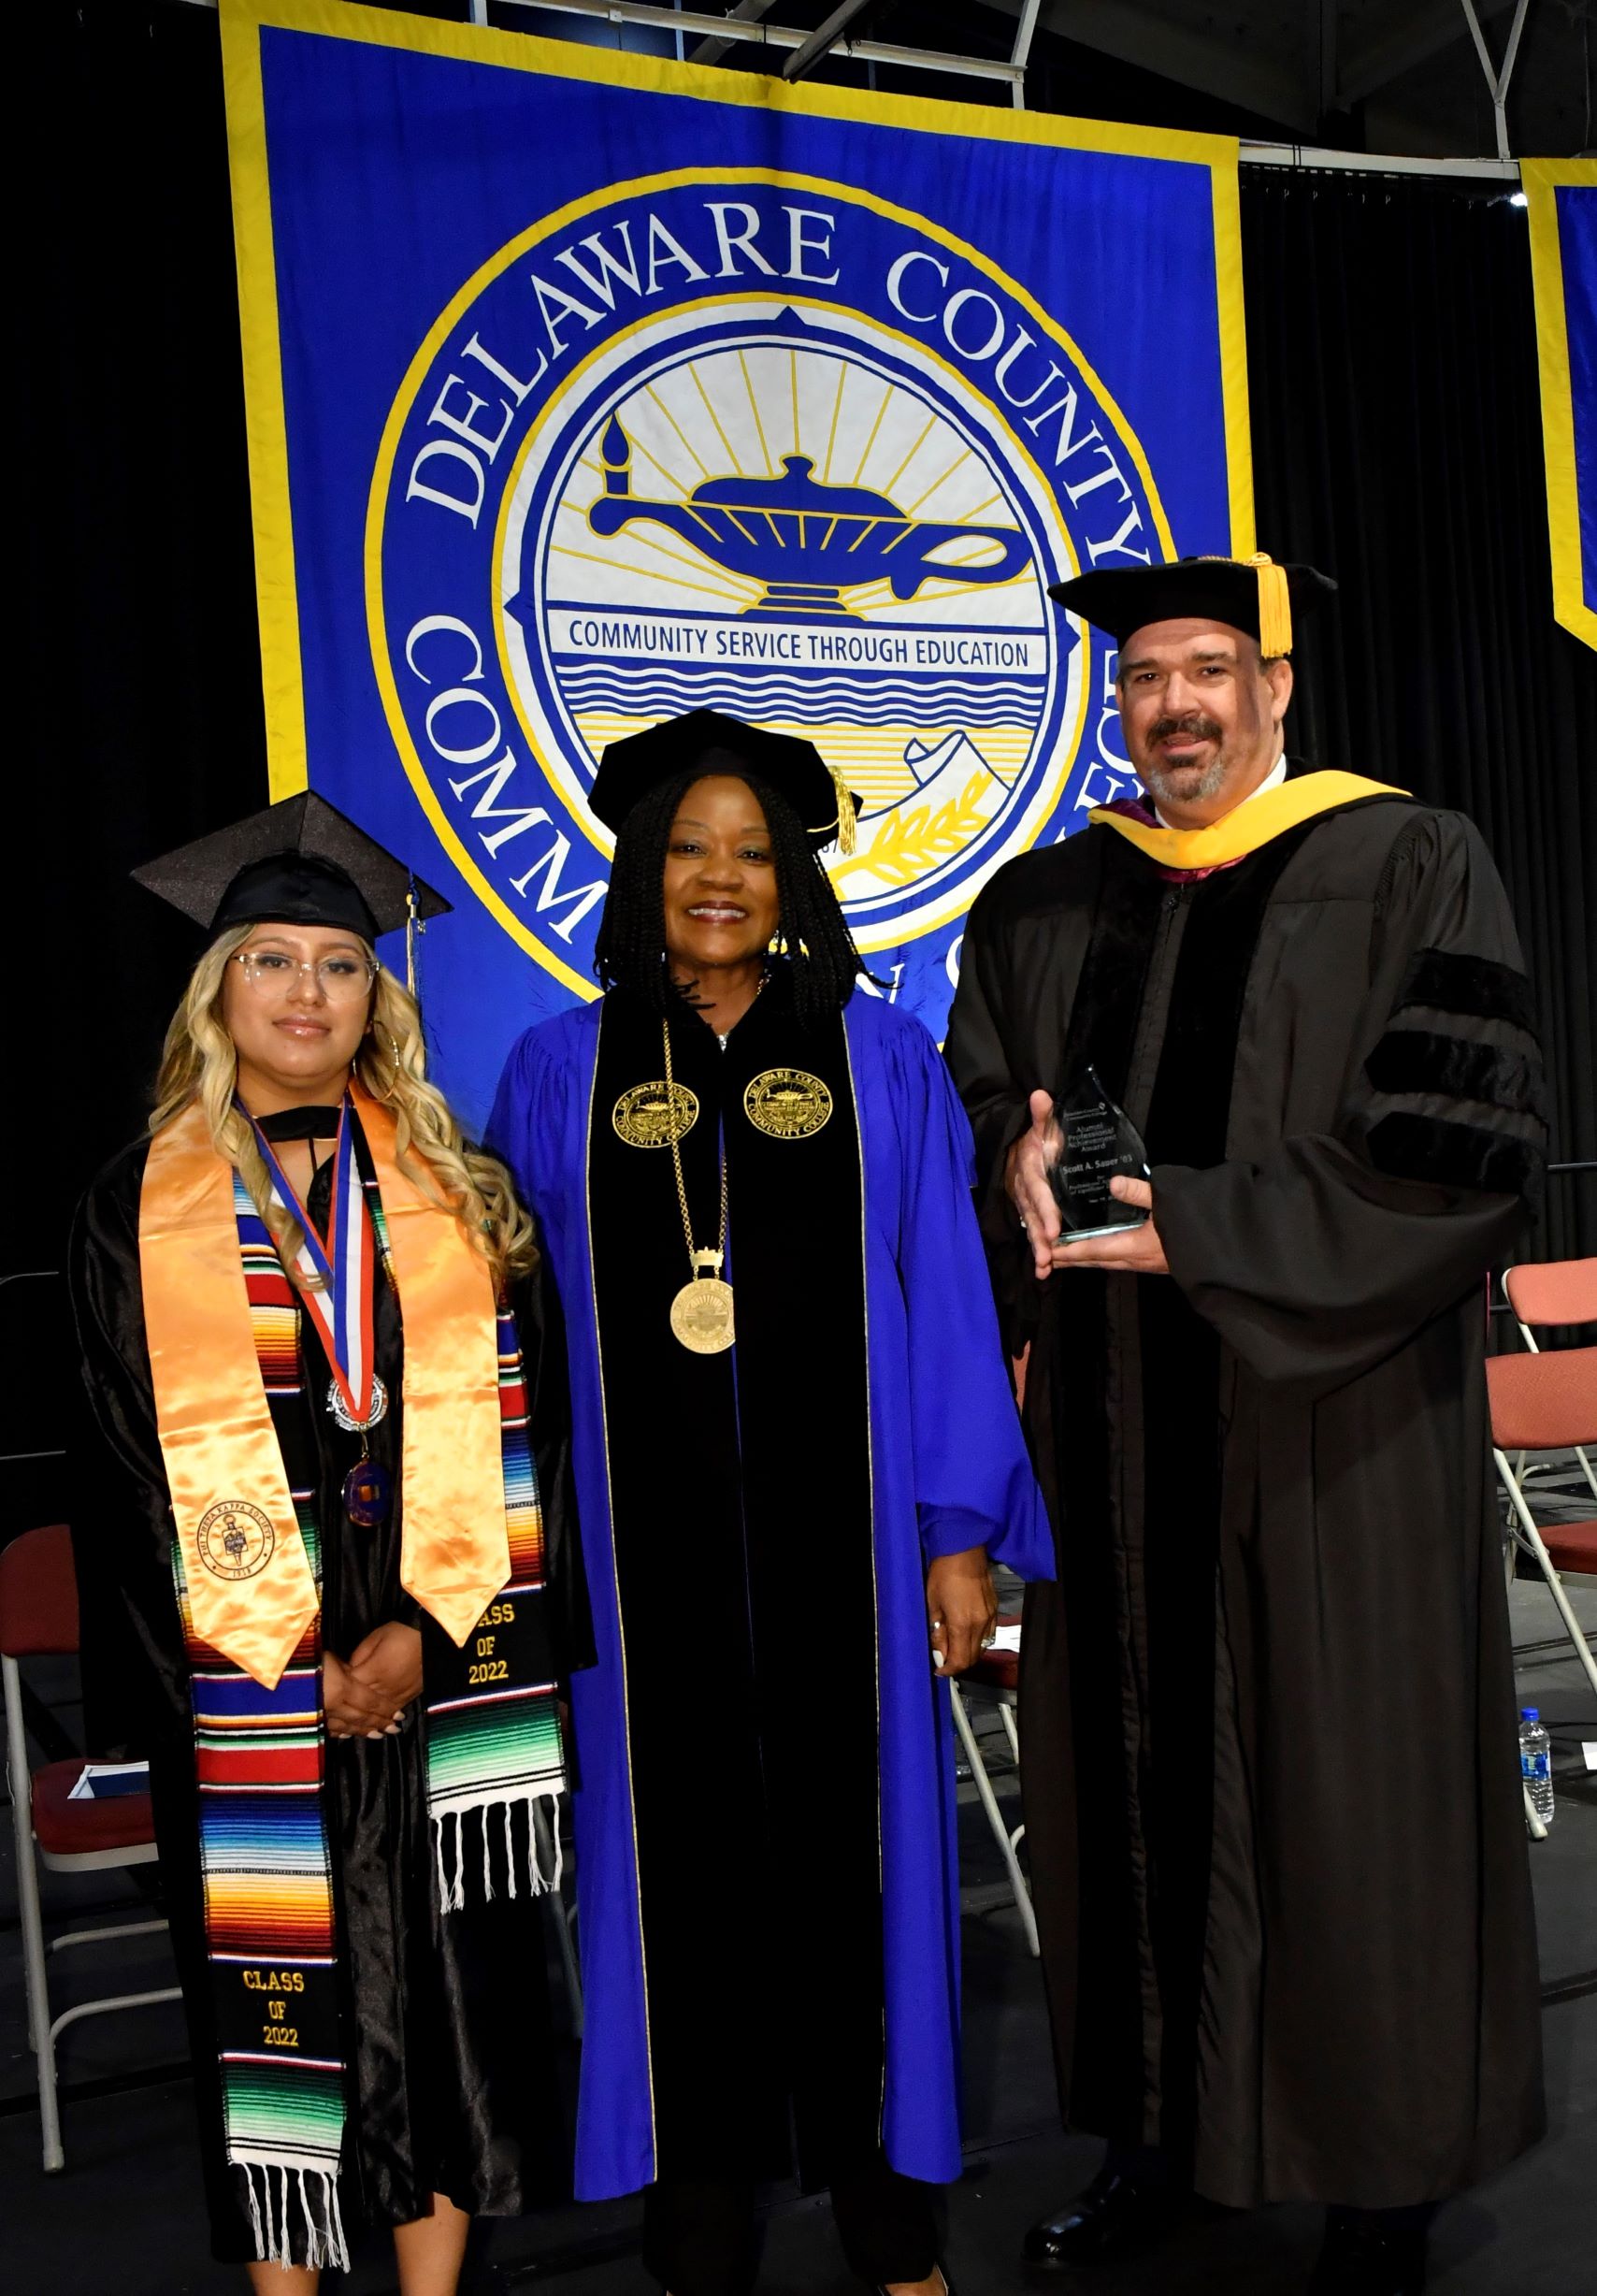 2022 Delaware County Community College graduate and Commencement student speaker Quetxalit Escalante of Thorndale, President Dr. L. Joy Gates Black, and 2022 Alumni Professional Achievement Award recipient Scott Sauer ‘03, SEPTA’s chief operating officer.